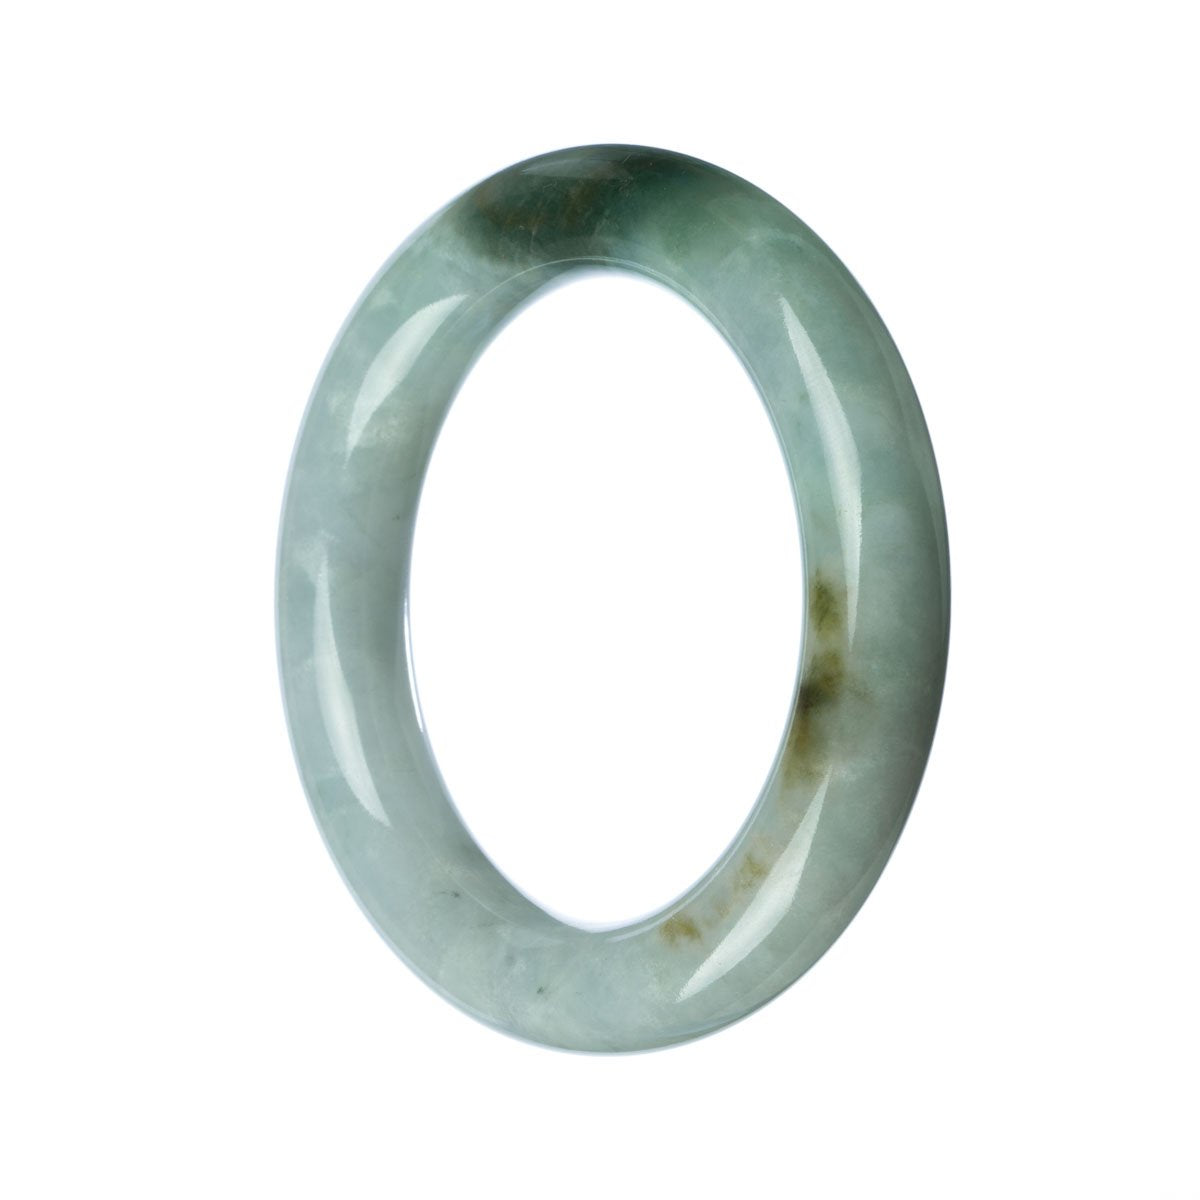 Real Type A White Green Jade Bangle - 57mm Round